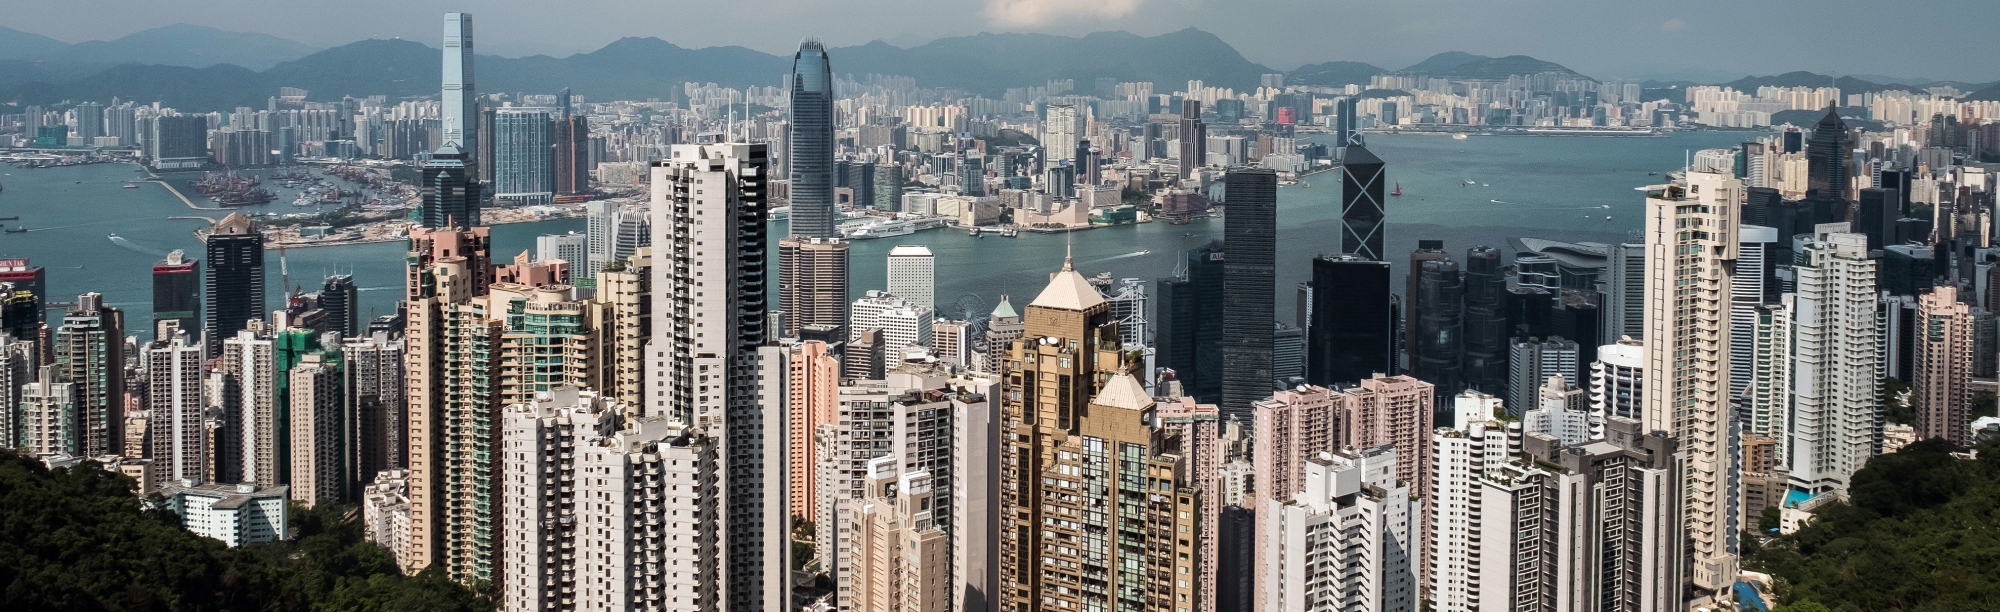 Hong Kong Skyline at the Peak as Asia Shares Extend Relief Rally